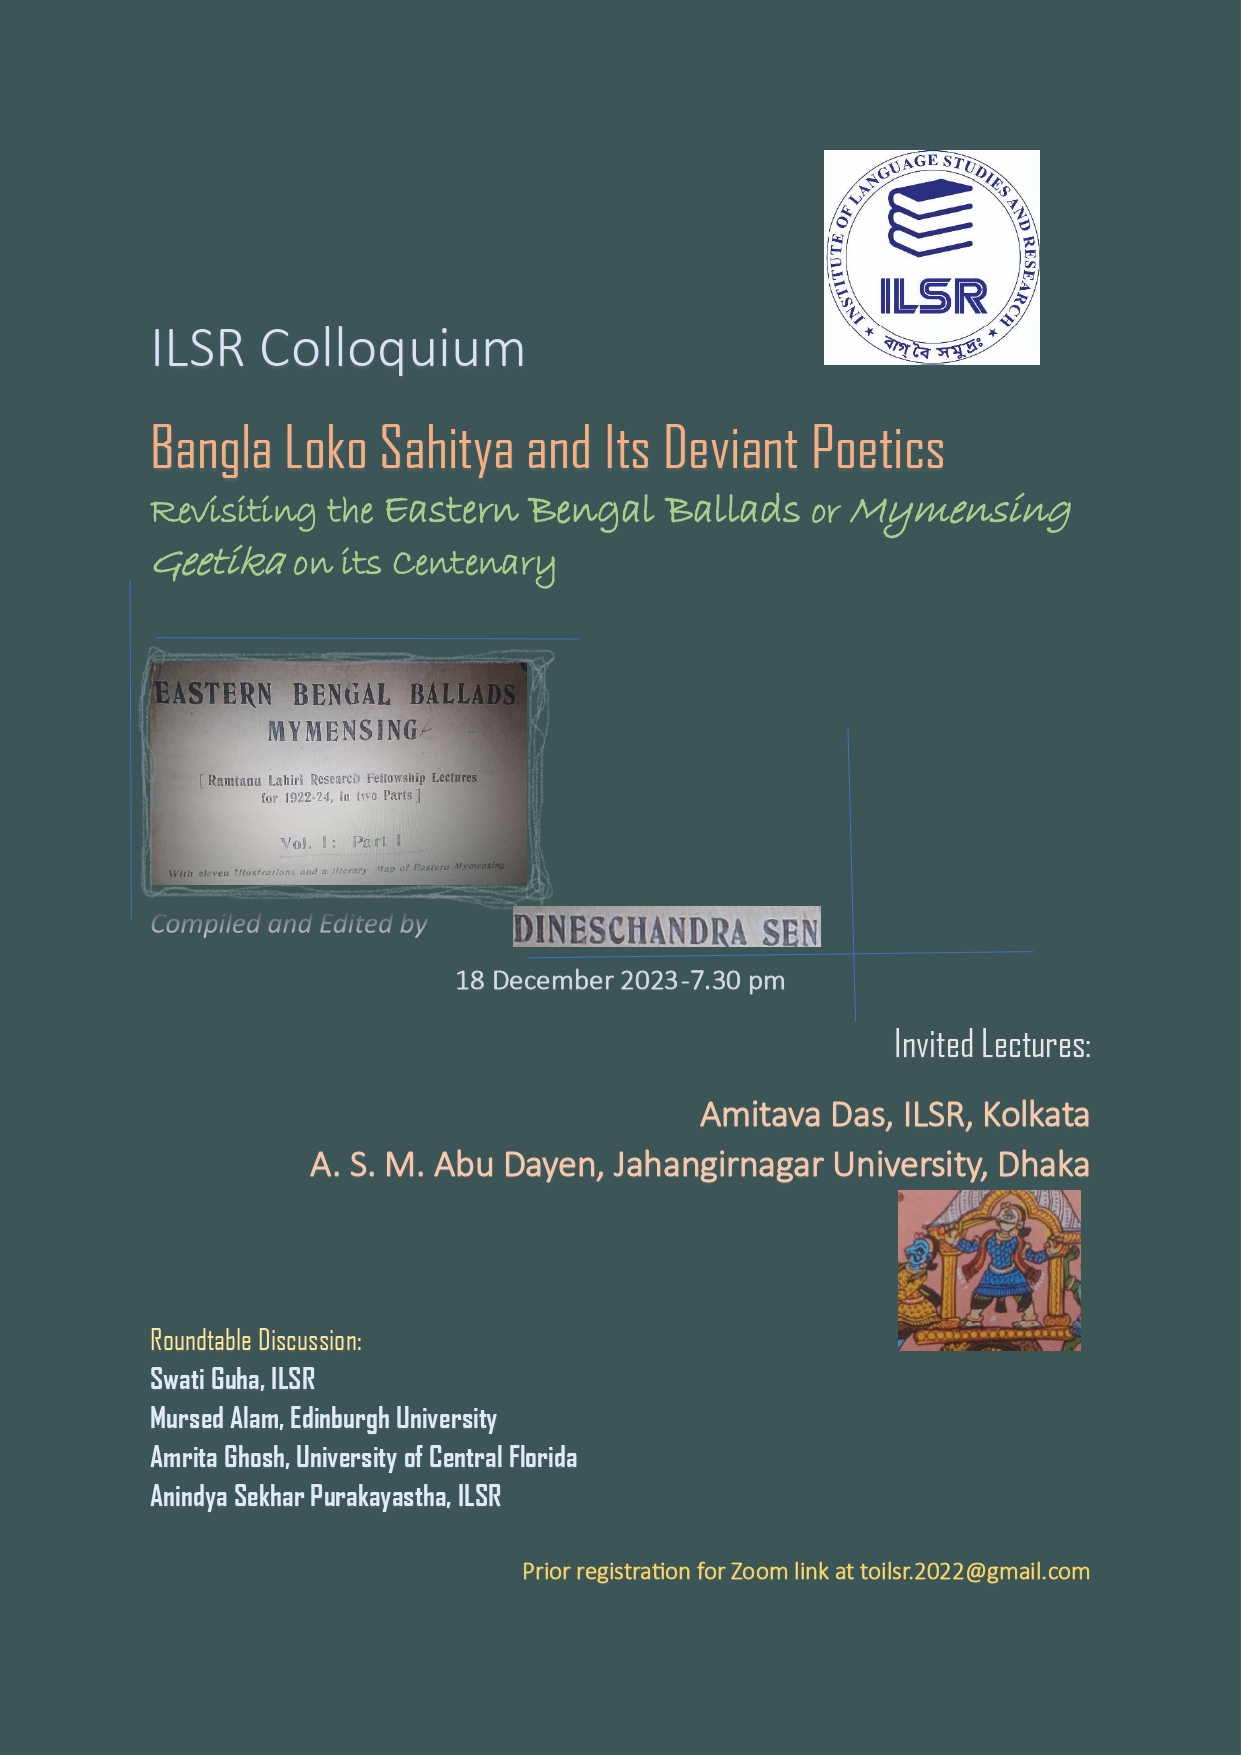 ILSR Colloquium on the centenary of the Mymensing Geetika on 18 December 2023 at 7.30 pm